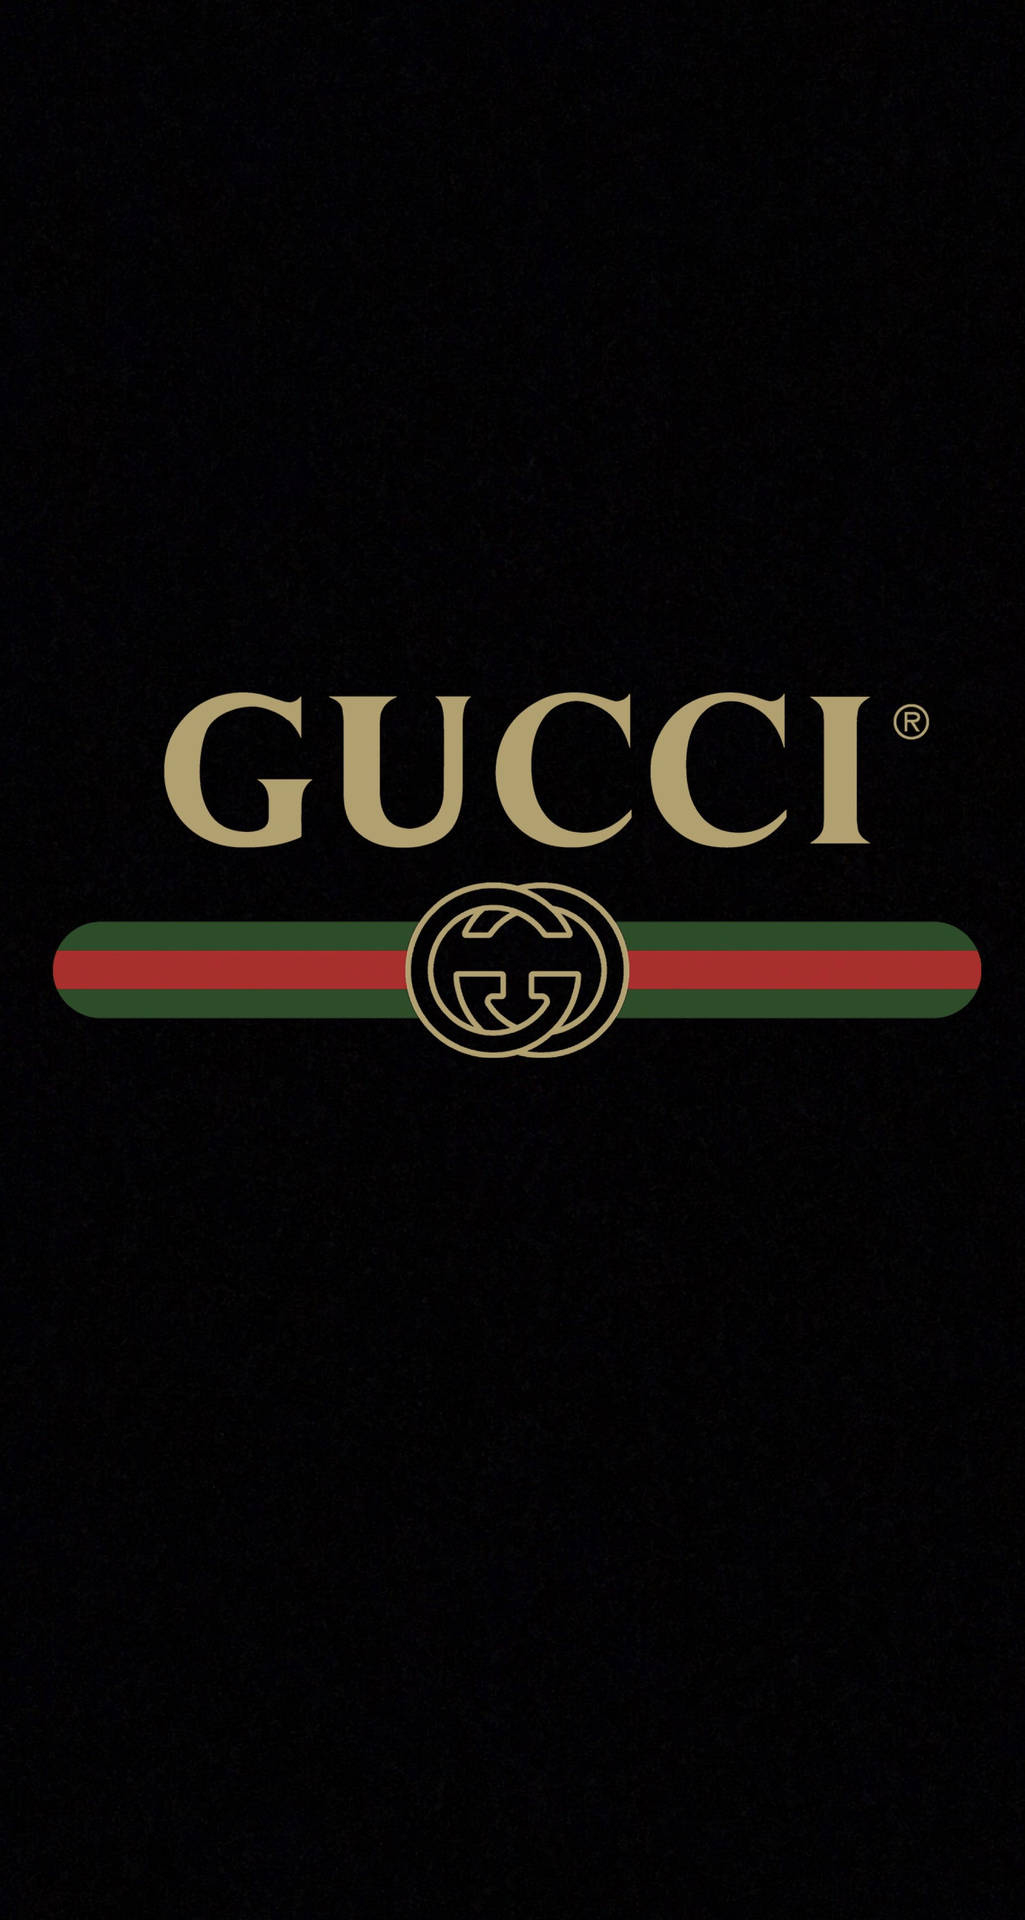 Download Cloudy Gucci Iphone Wallpaper